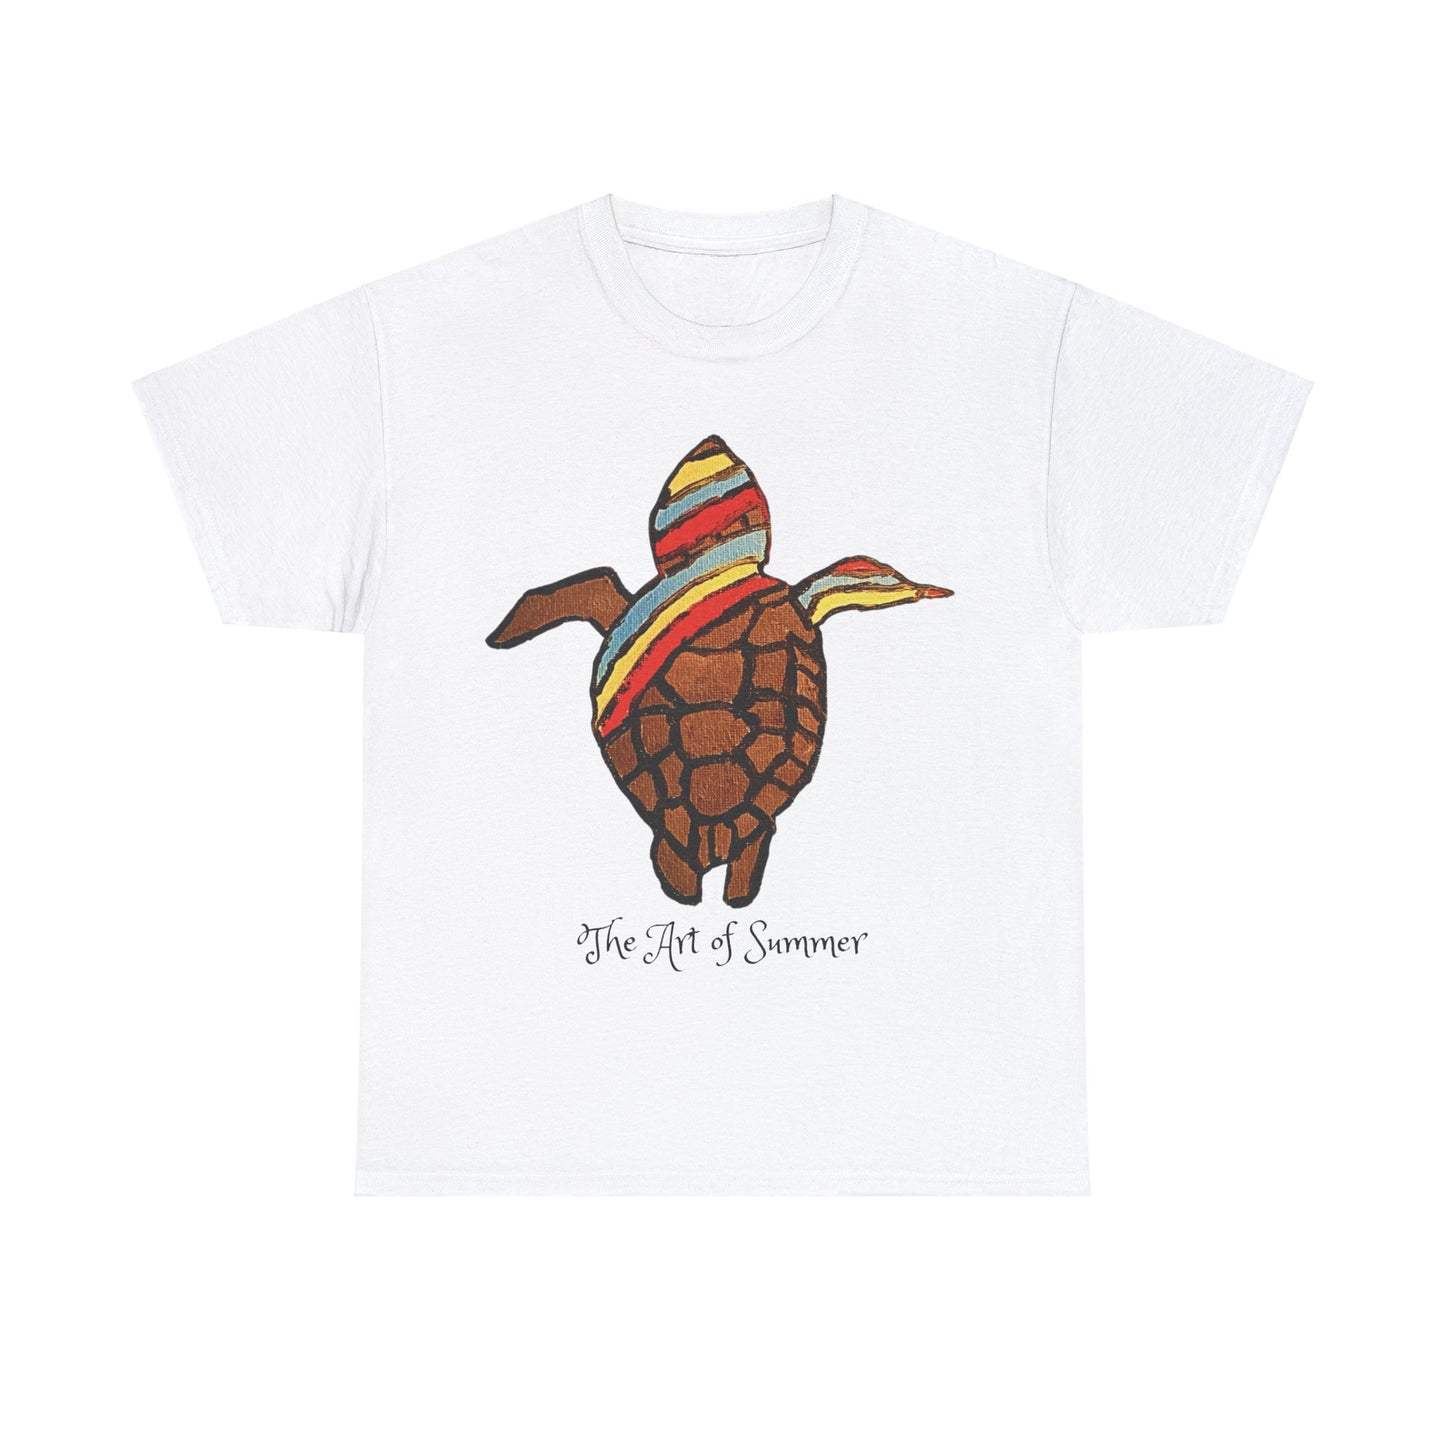 Summer Sea Turtle - ART OF SUMMER - Tee Shirt - Save the Sea Turtle - Protect the Oceans Whimsical Colored Sea Turtle Unique Collection Express Delivery available